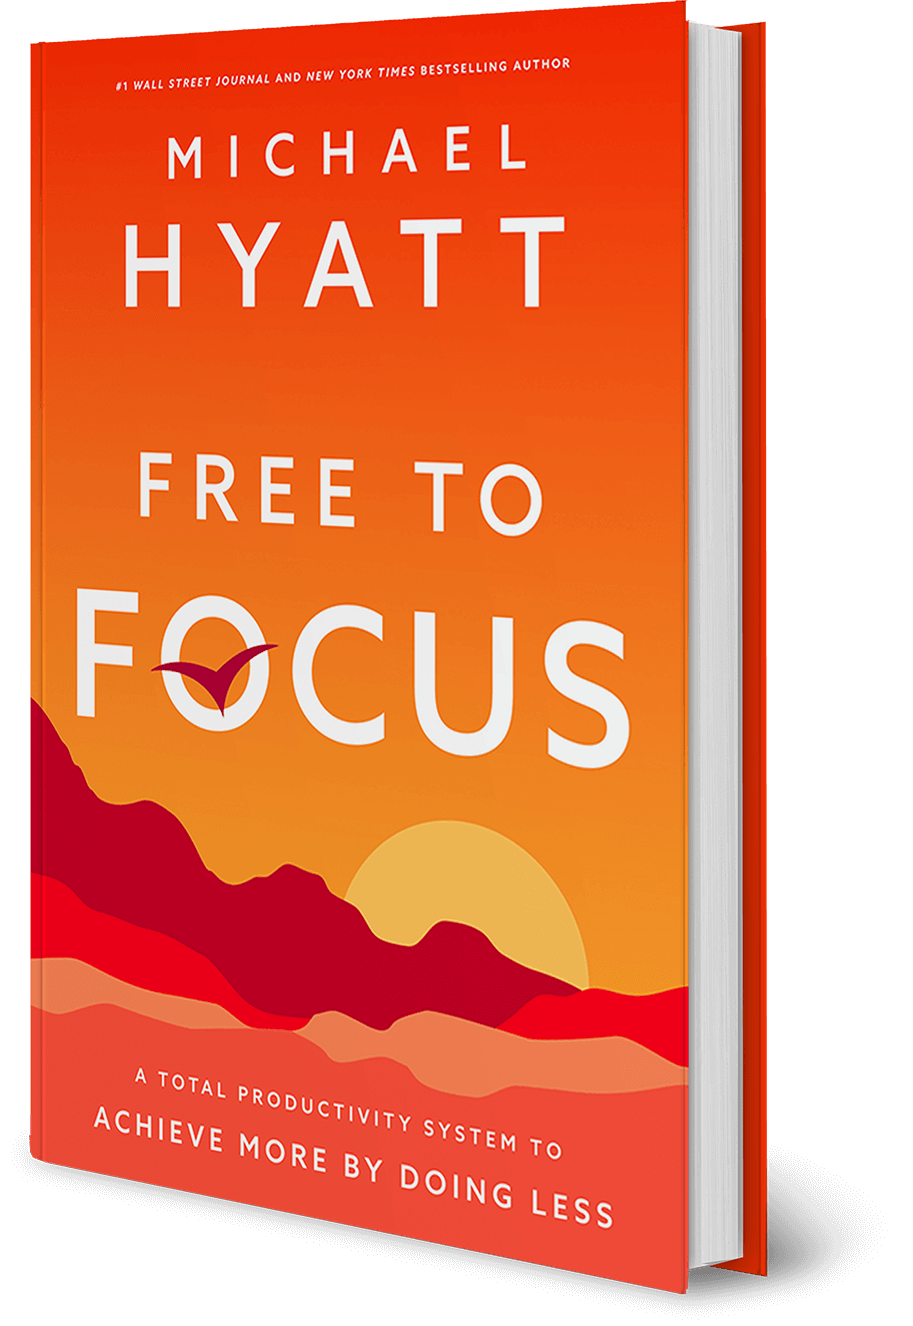 The cover image of 'Free to Focus' featuring a landscape backdrop and a bird flying through the headline